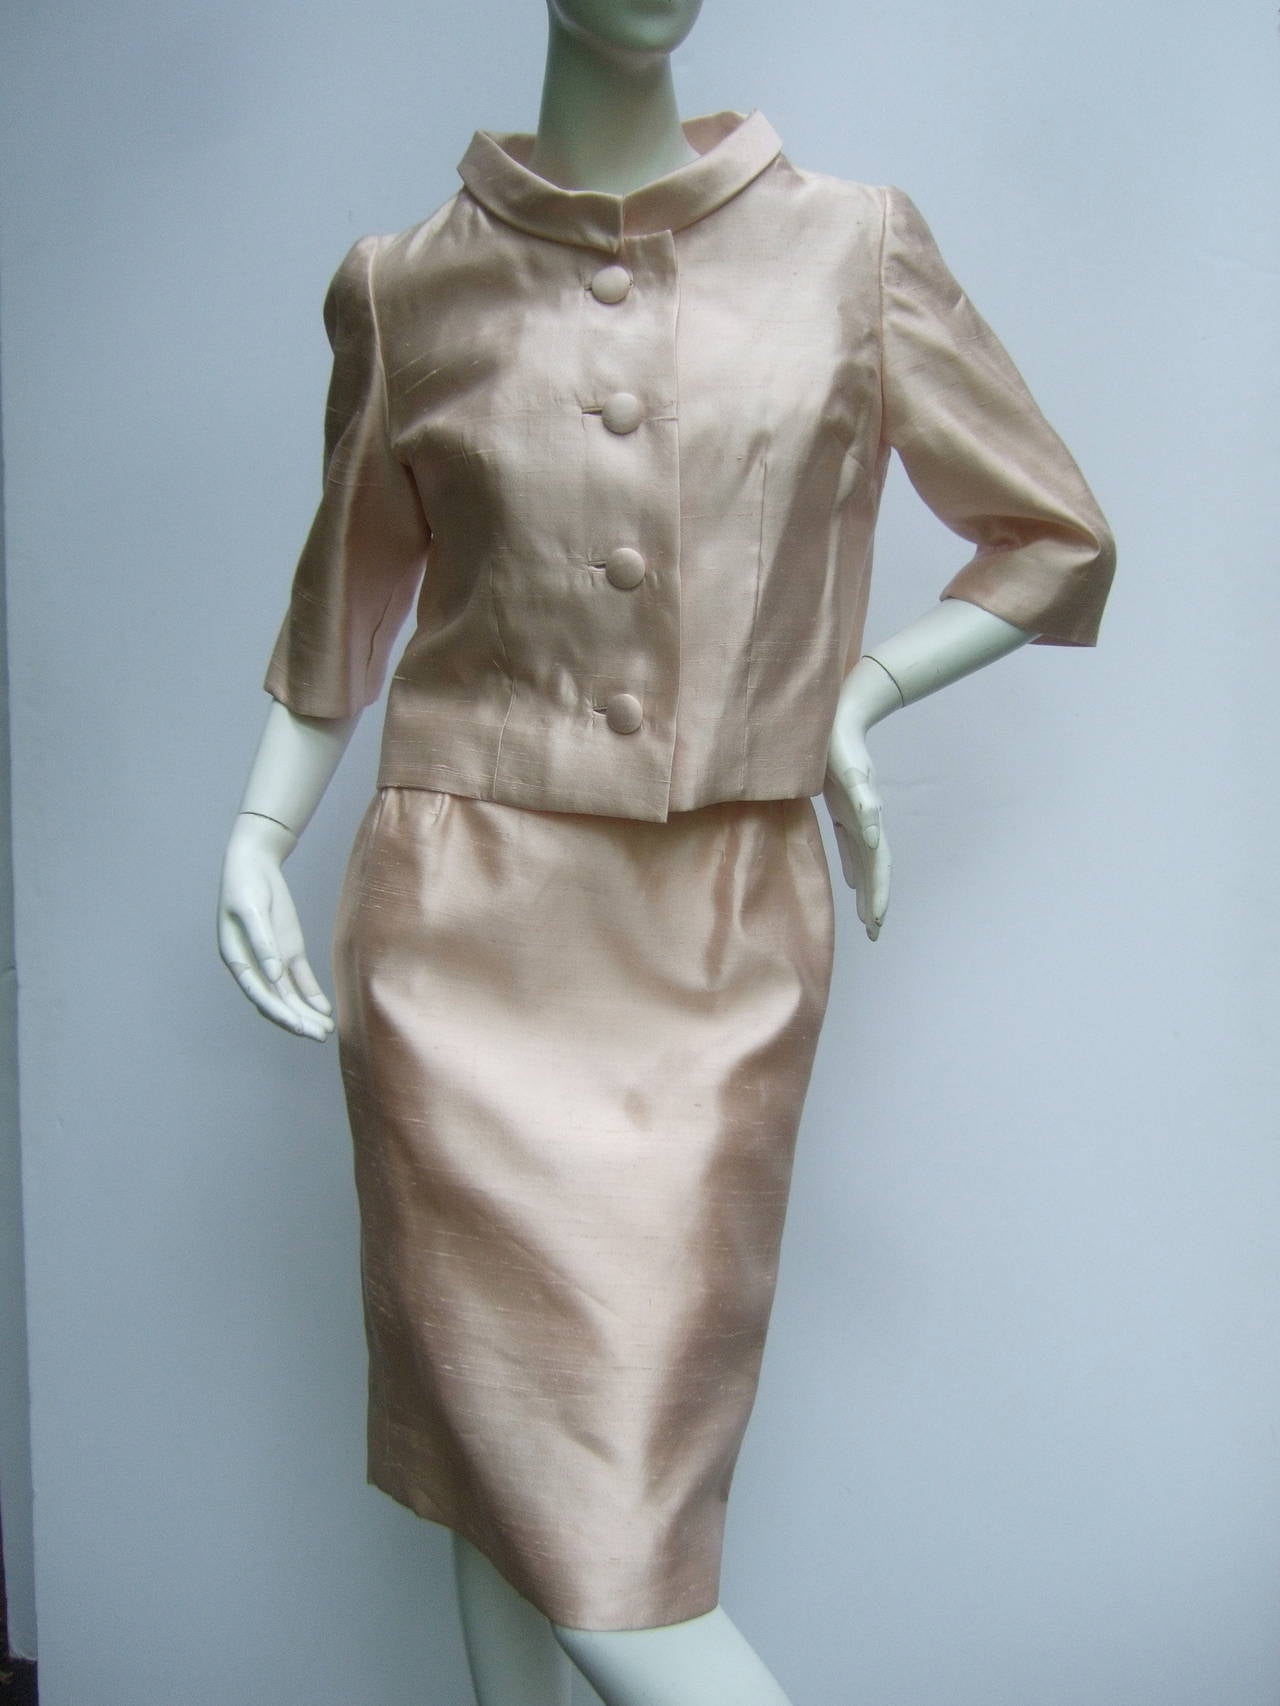 1960s Shantung pale pink jacket & dress ensemble
The chic retro suit is designed with a cropped jacket 
with matching silk buttons. The sleeveless sheath
dress has a sheer lace overlay bodice with glass beading
& clusters of pale pink resin